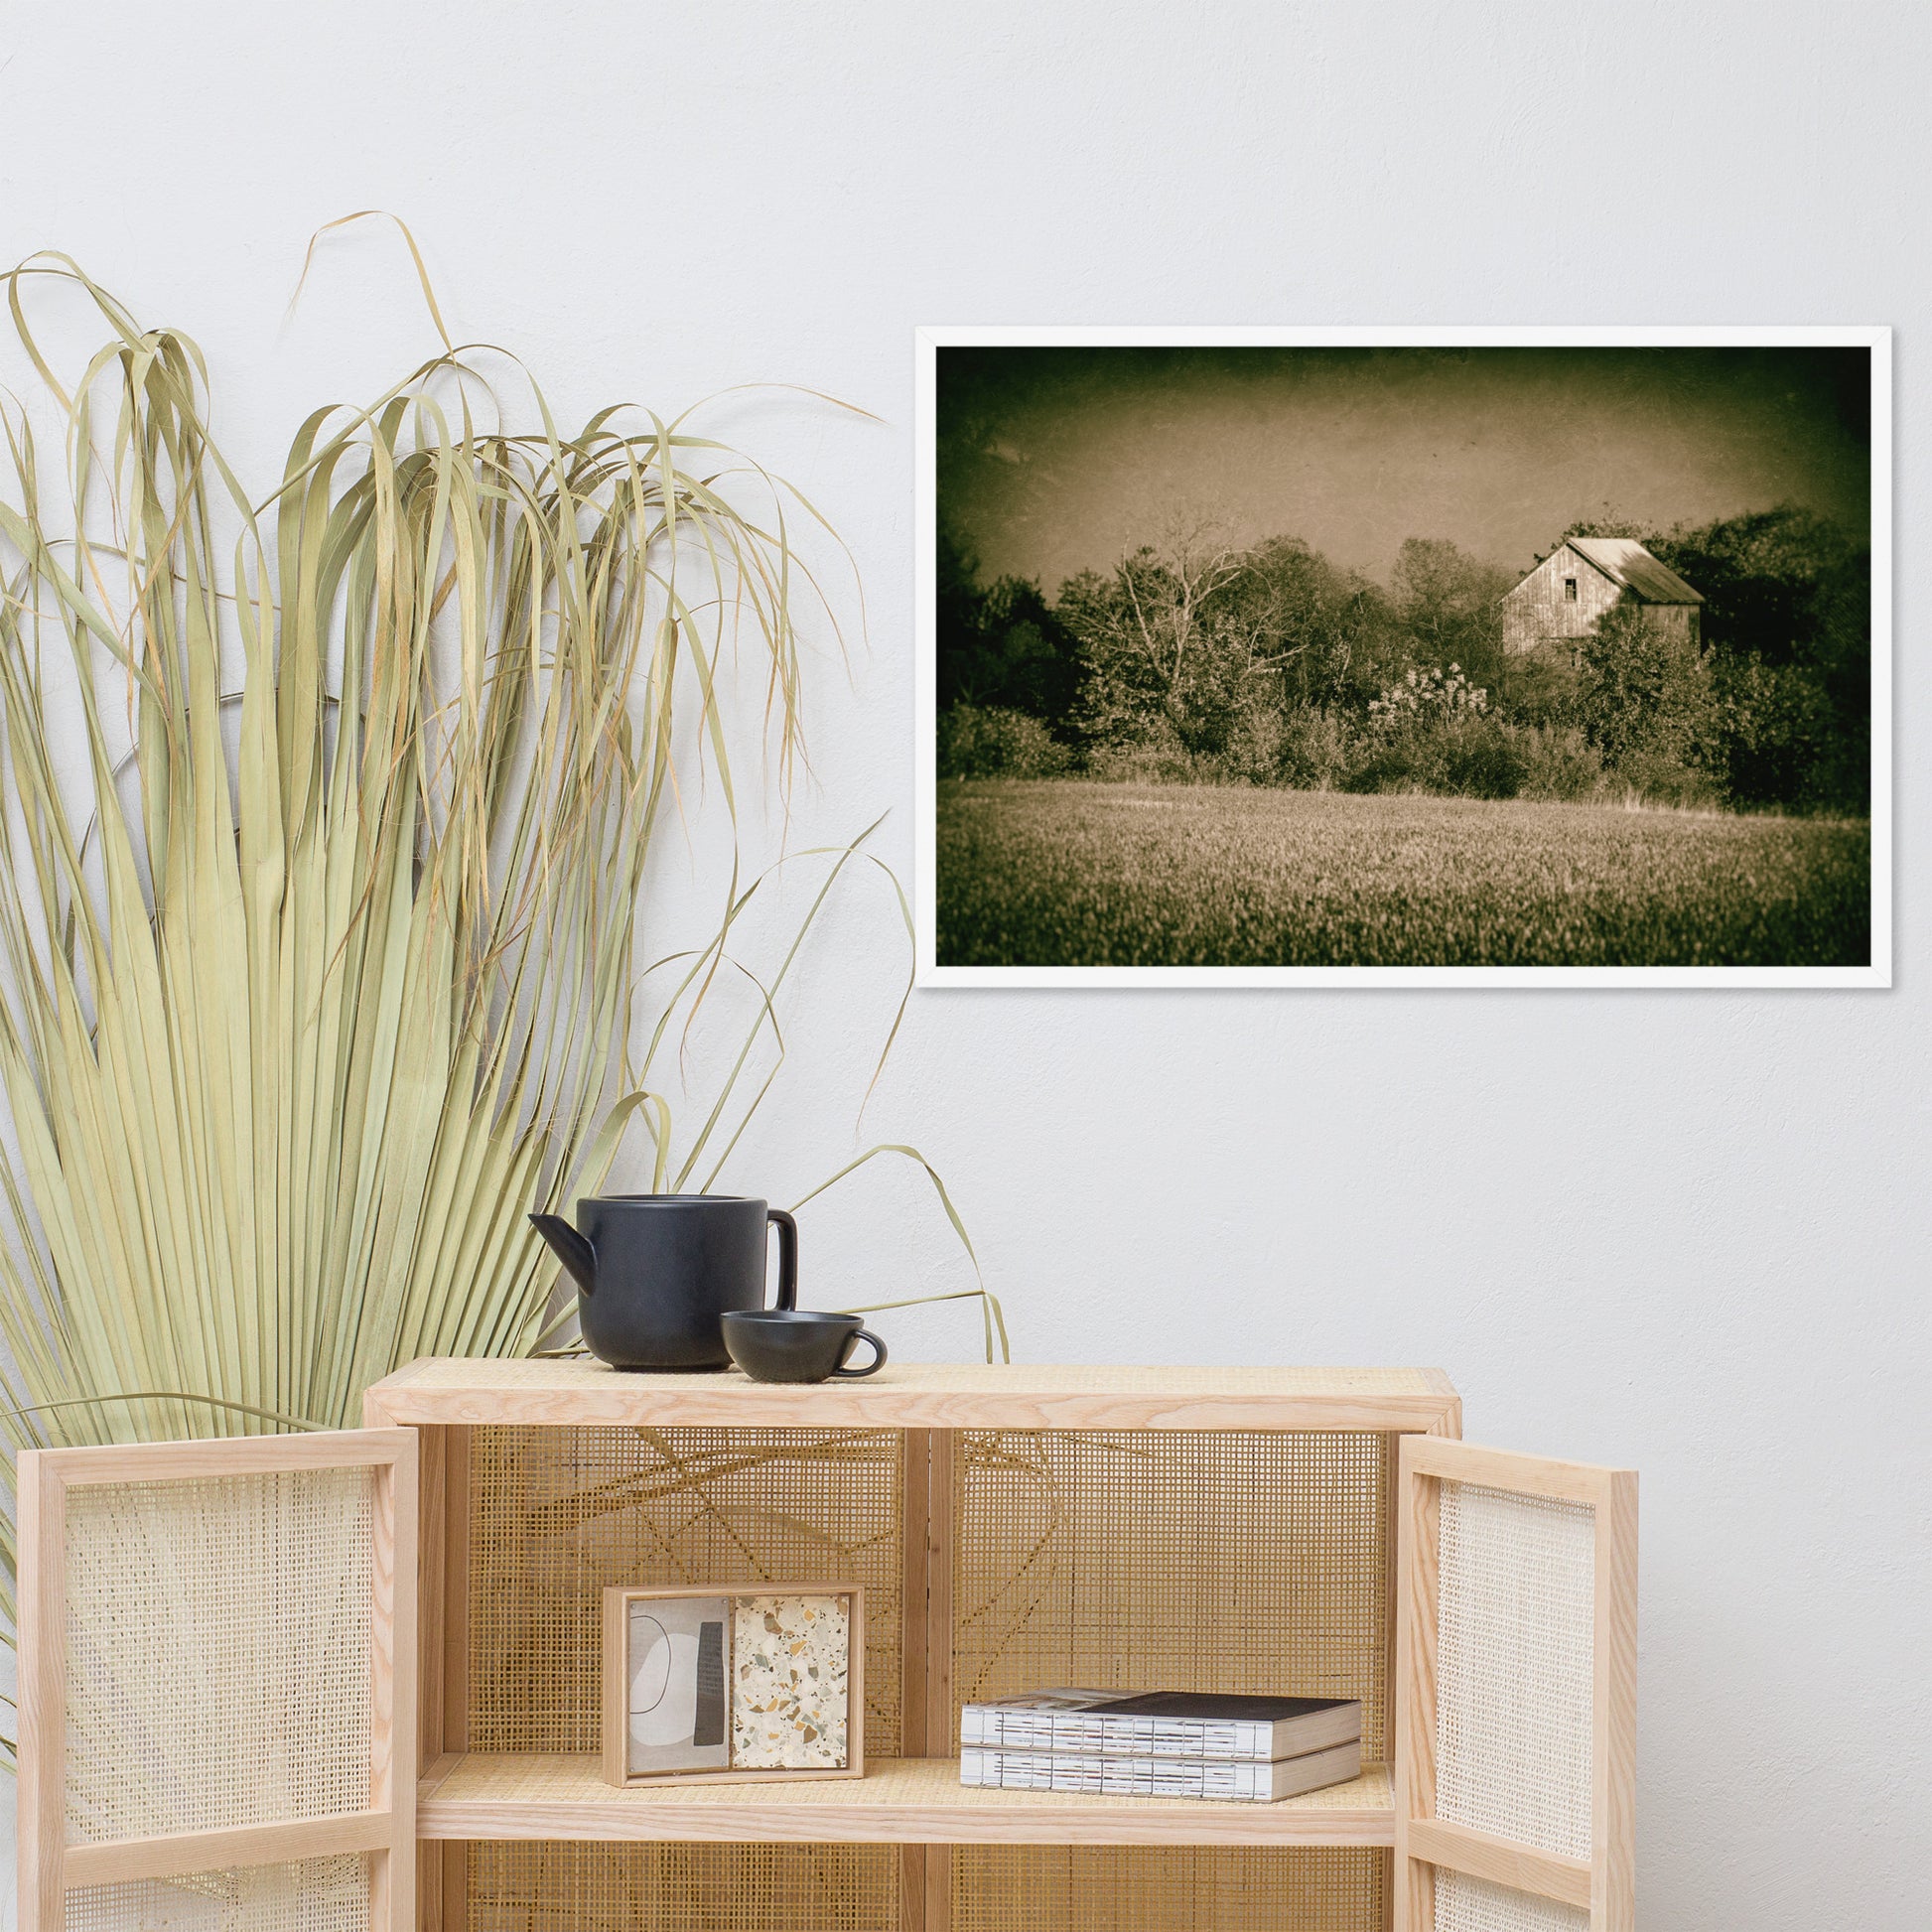 Horizontal Farmhouse Wall Decor: Abandoned Barn In The Trees - Rural / Rustic / Farmhouse Style / Landscape / Nature Vintage Framed Photo Paper Prints - Artwork - Wall Decor